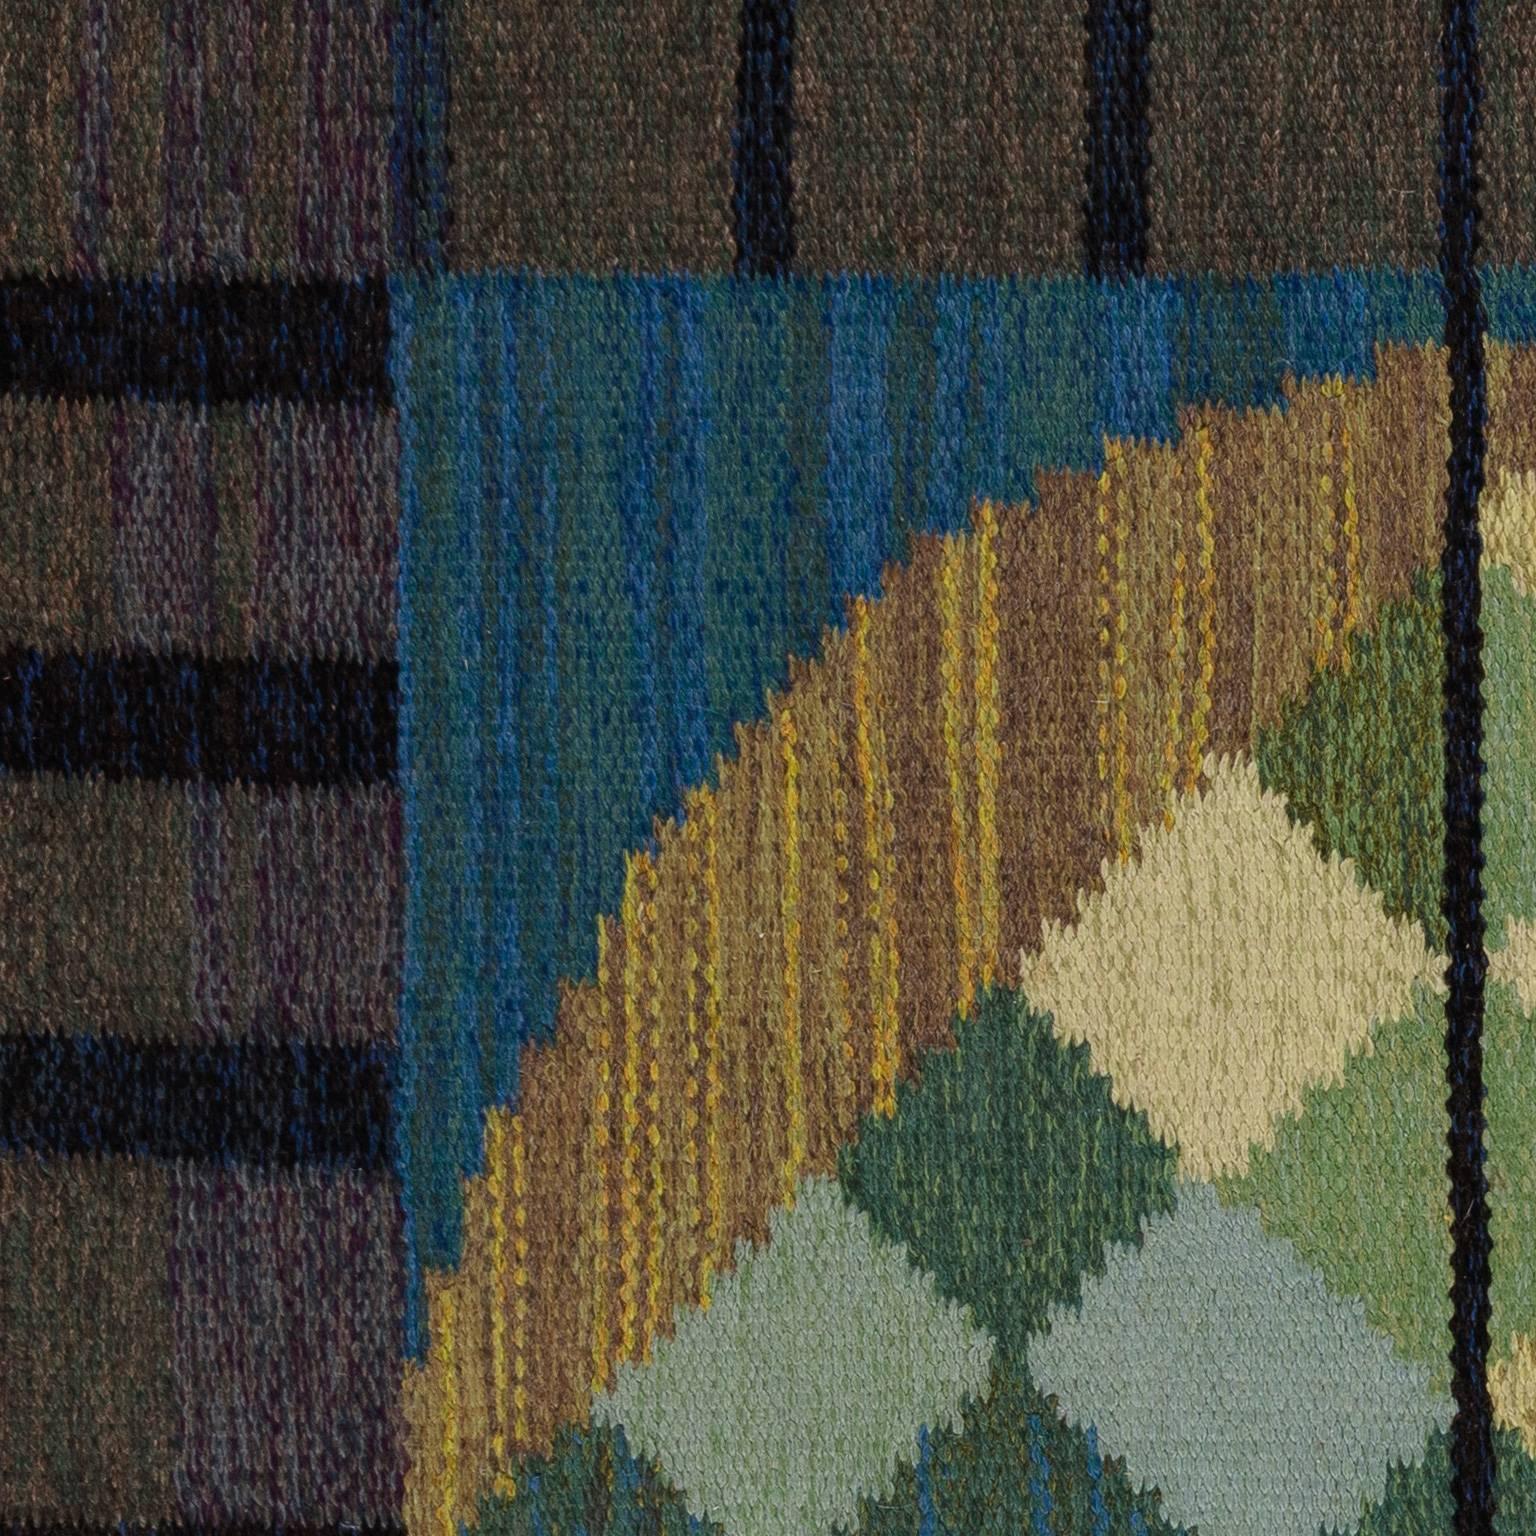 Fantastic and uniq geometrical rug with strong and vibrant pattern. Two circles are holding embraces squares in different green, blue and beige tones. Signed by both Inga-Mi Vannérus-Rydgran, and Jonkopings Lans Hemslojd (Jönköpings Läns Hemslöjd).